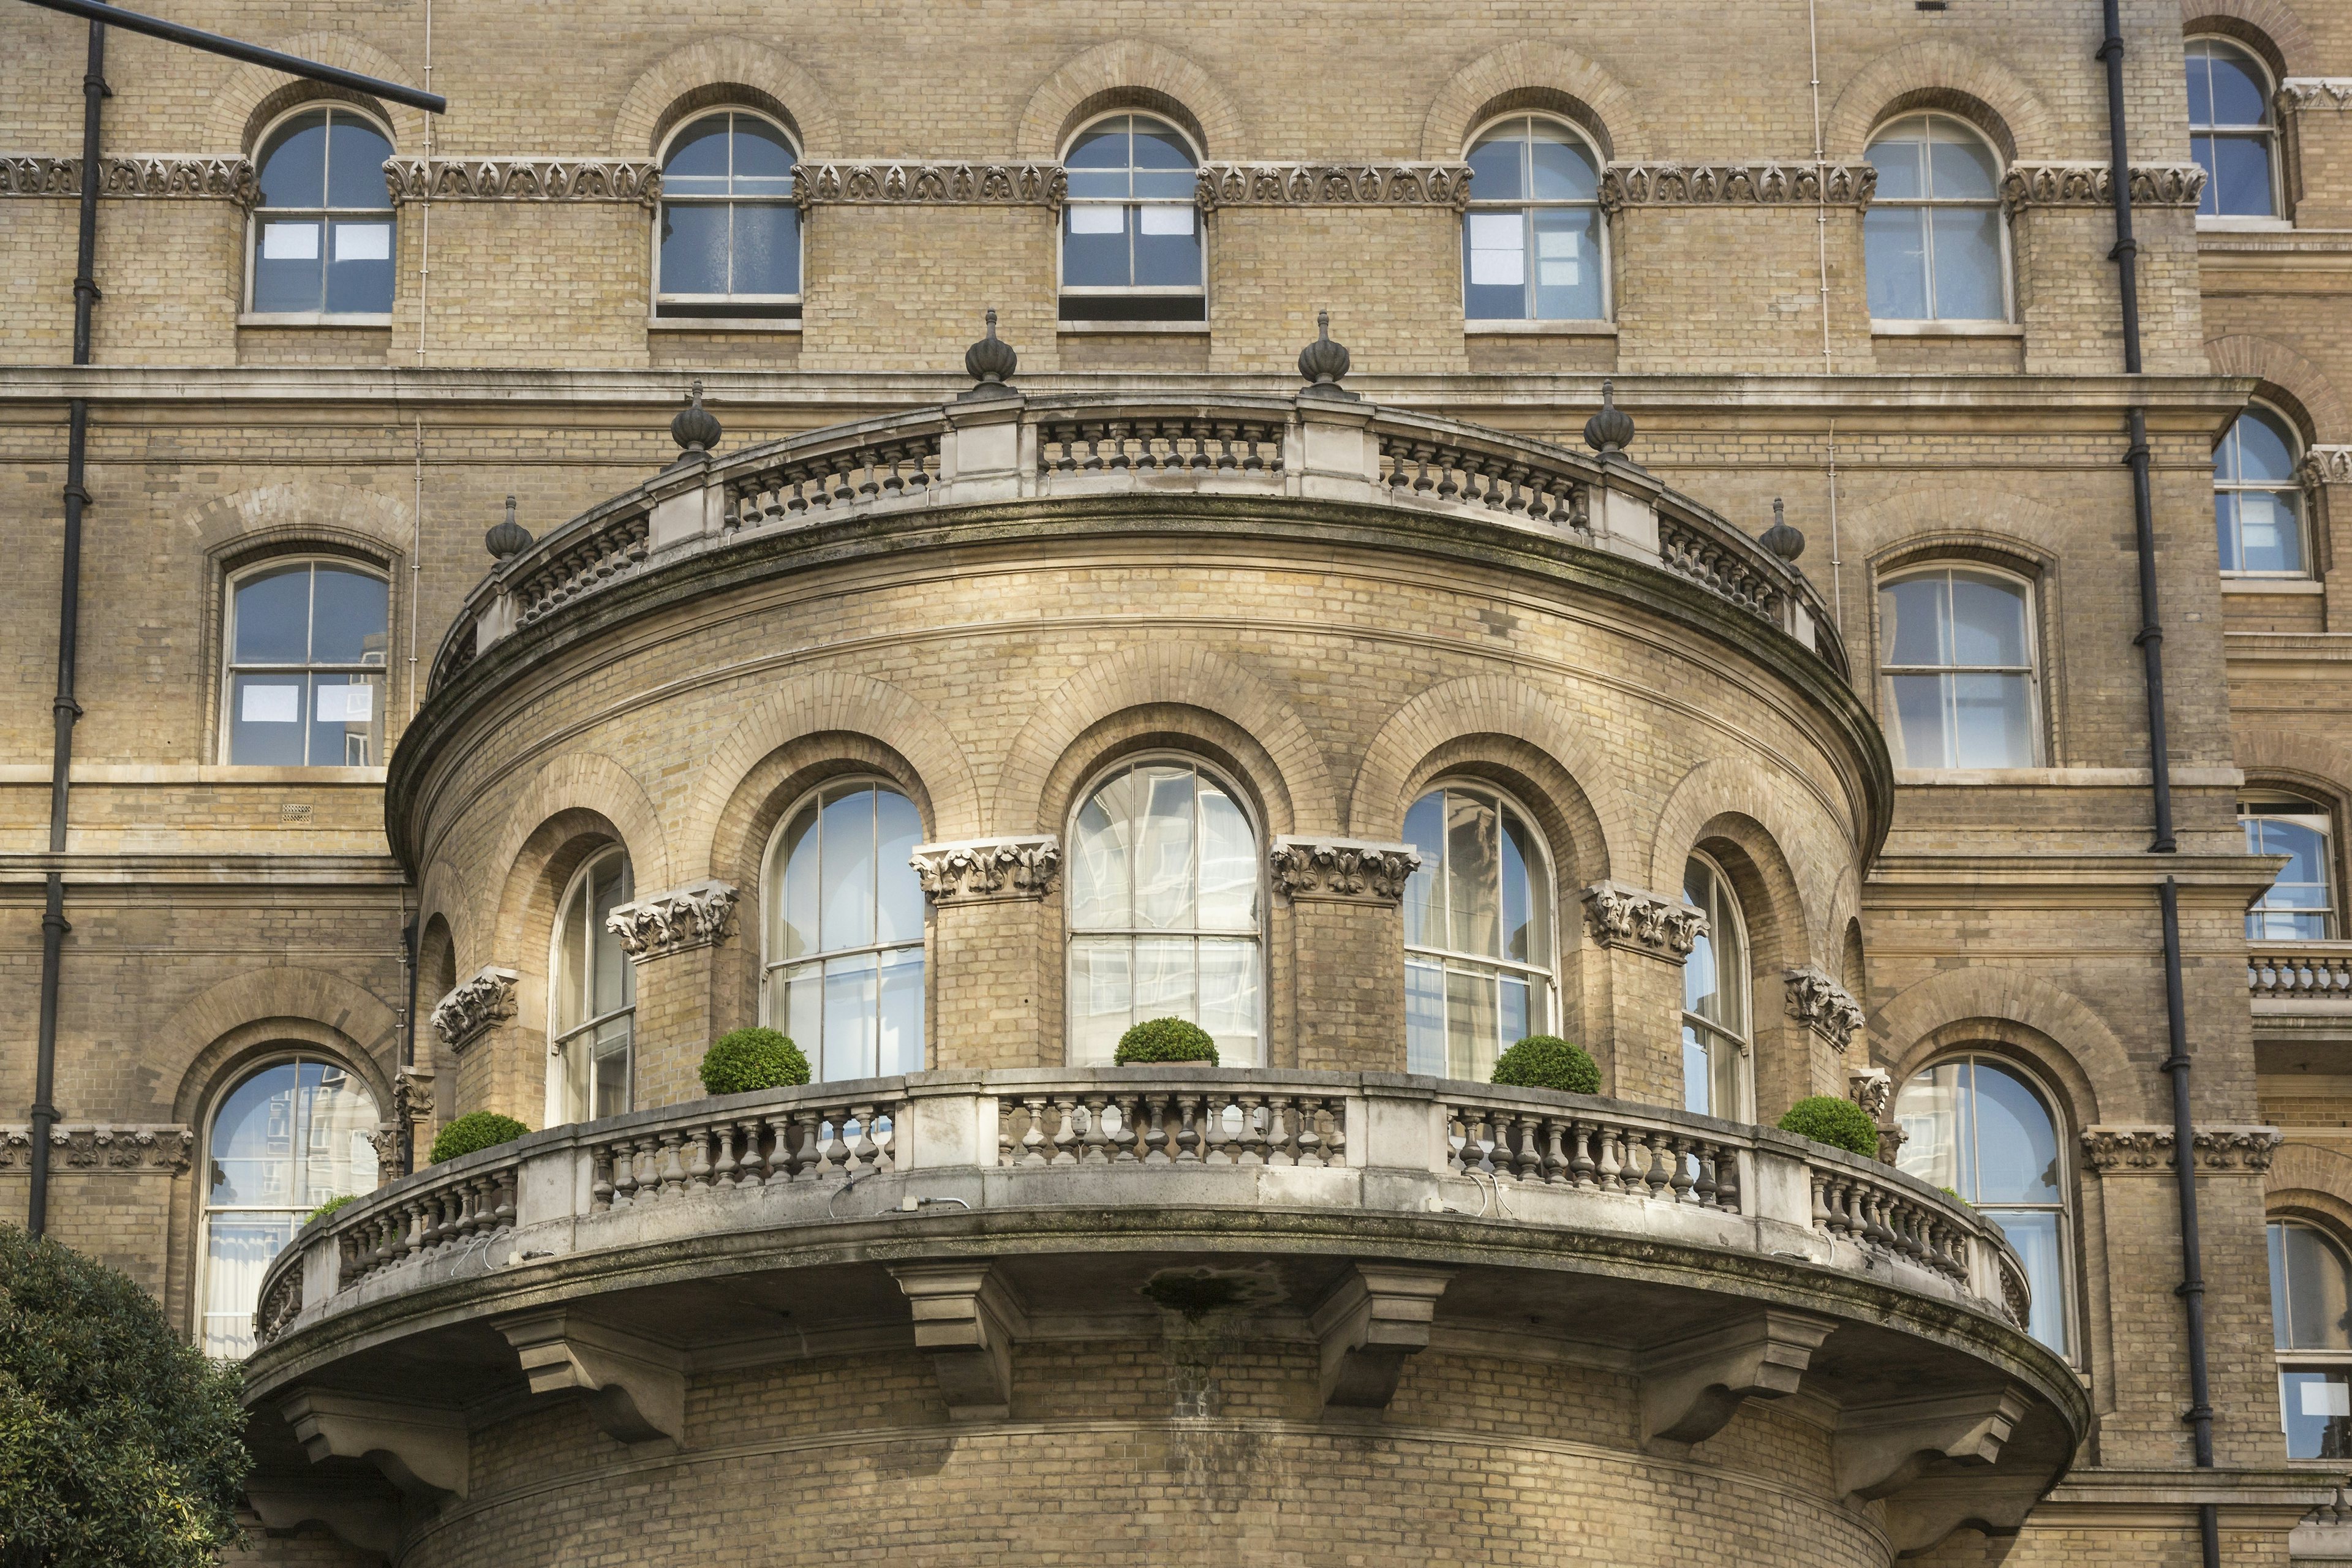 Detail of the facade of The Langham in London, the famous Victorian-style hotel which opened in 1865. Image via Shutterstock.